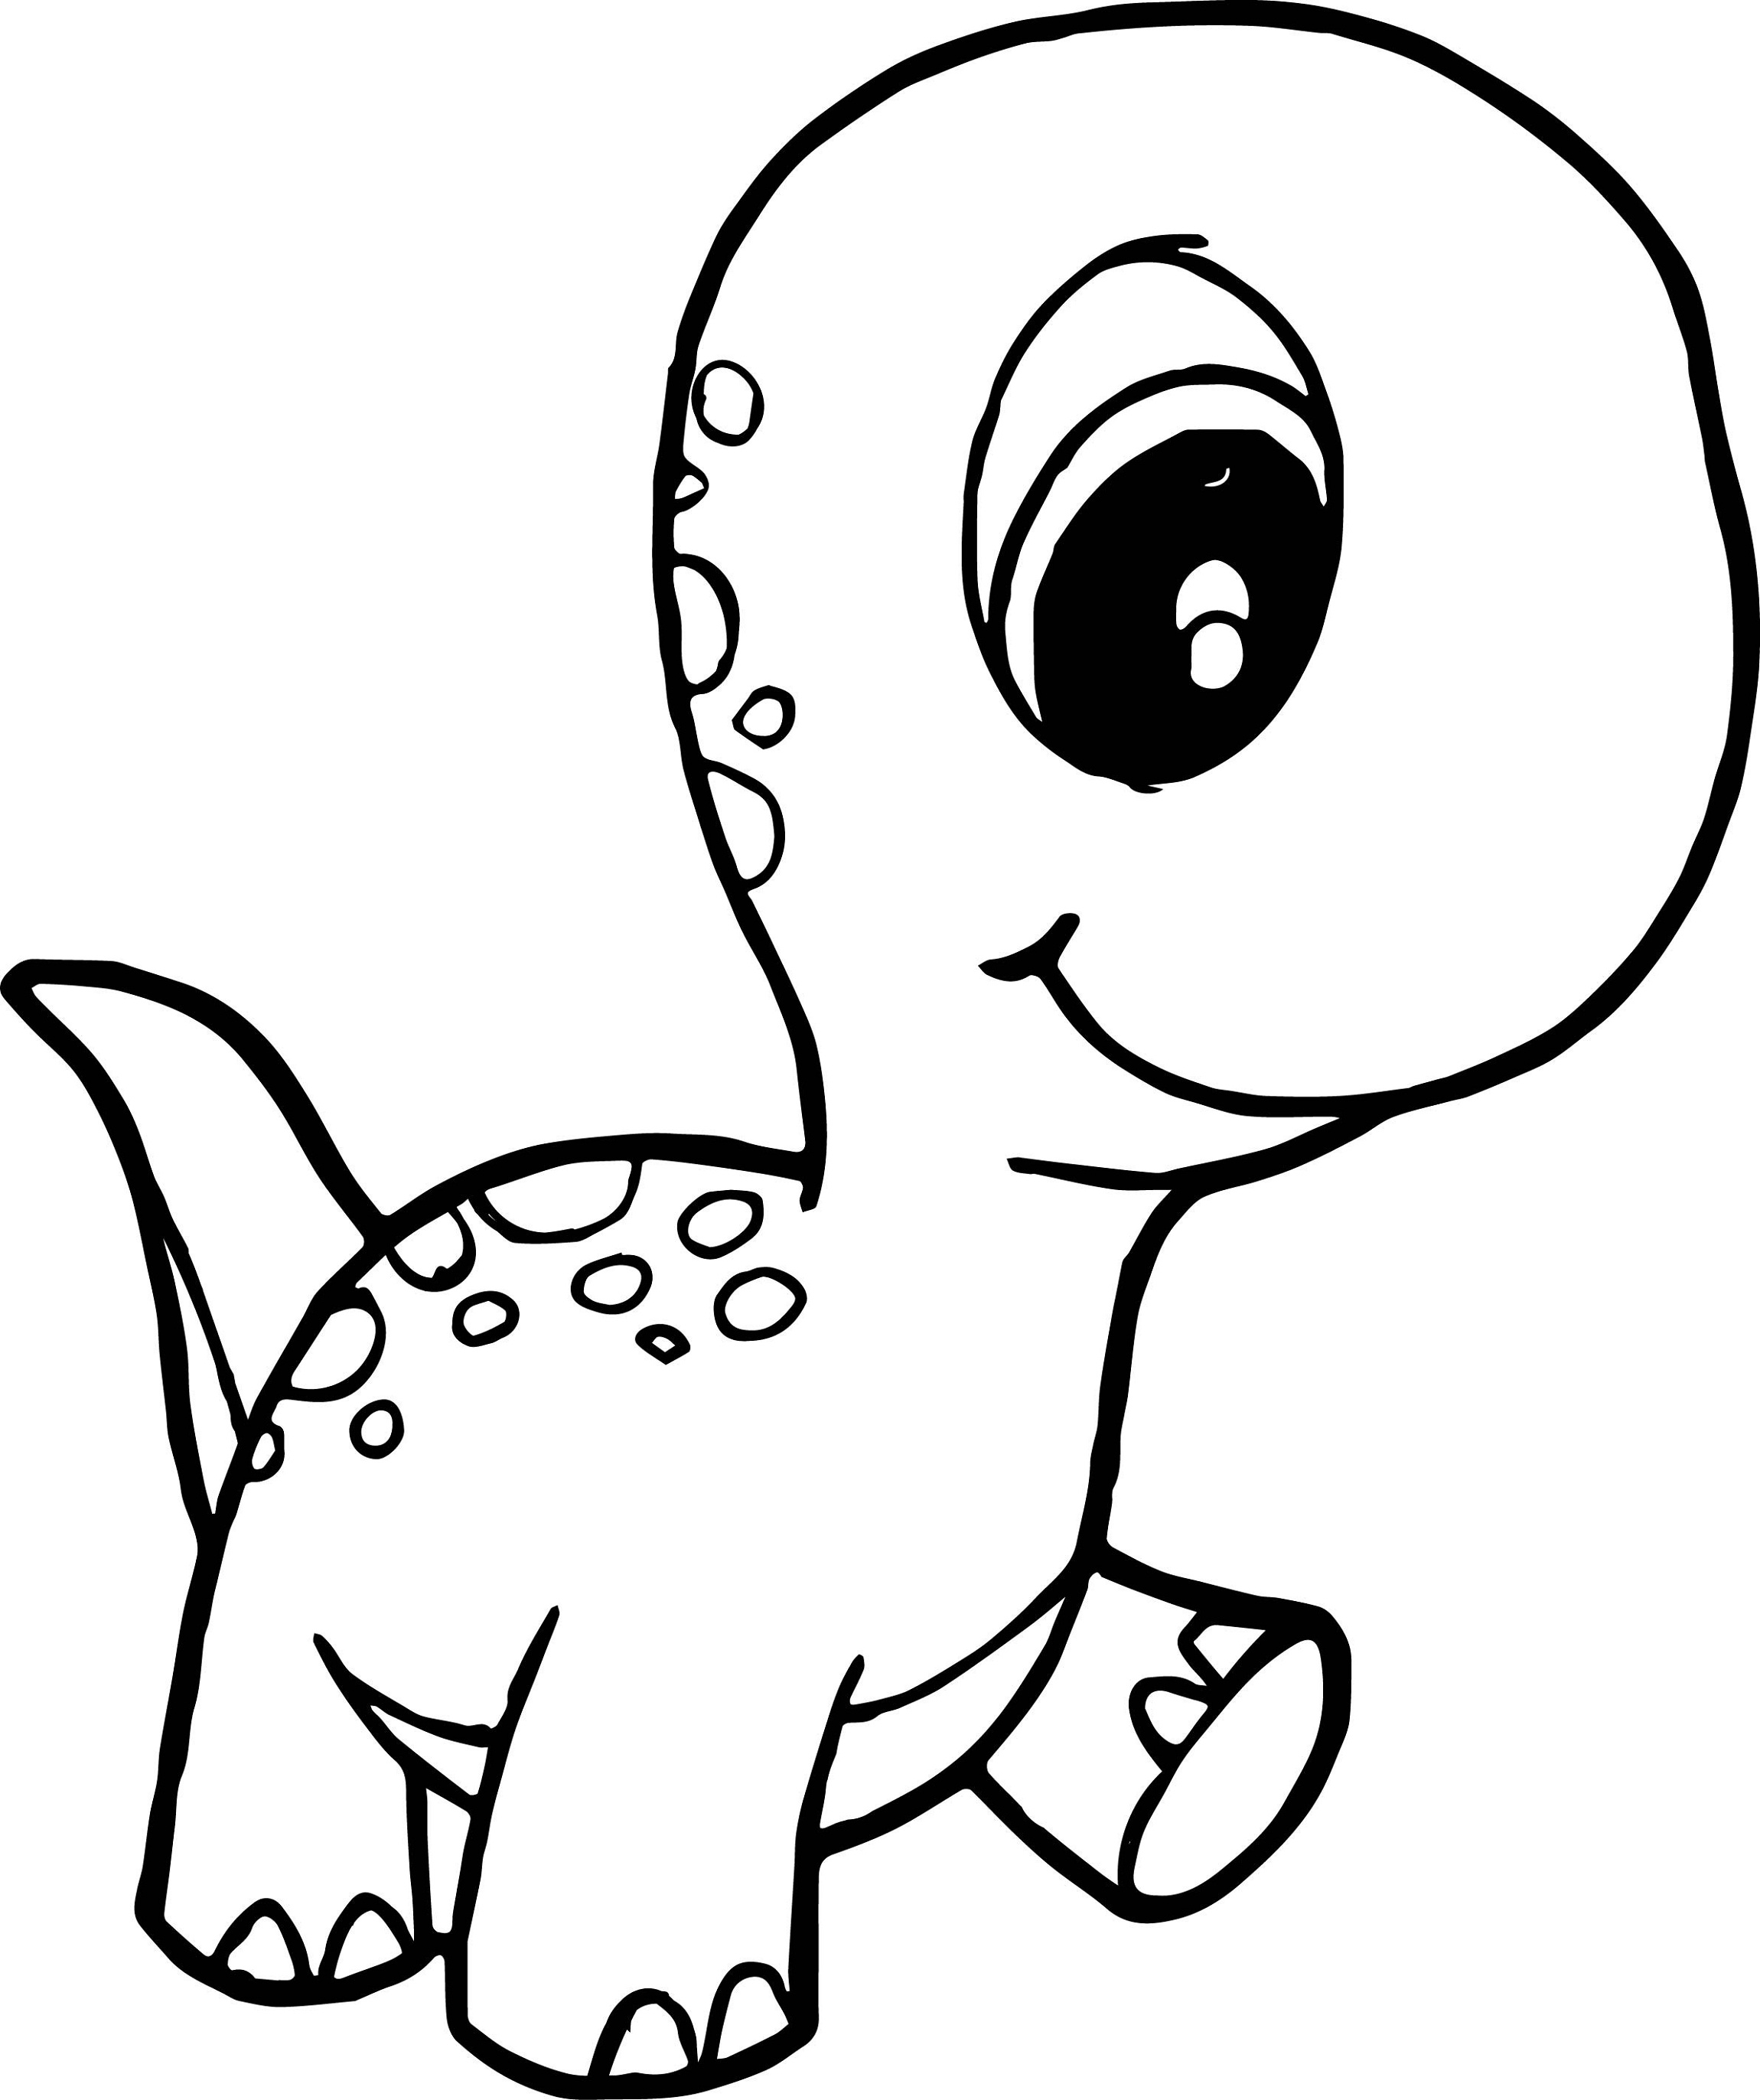 coloring-pages-printable-dinosaur